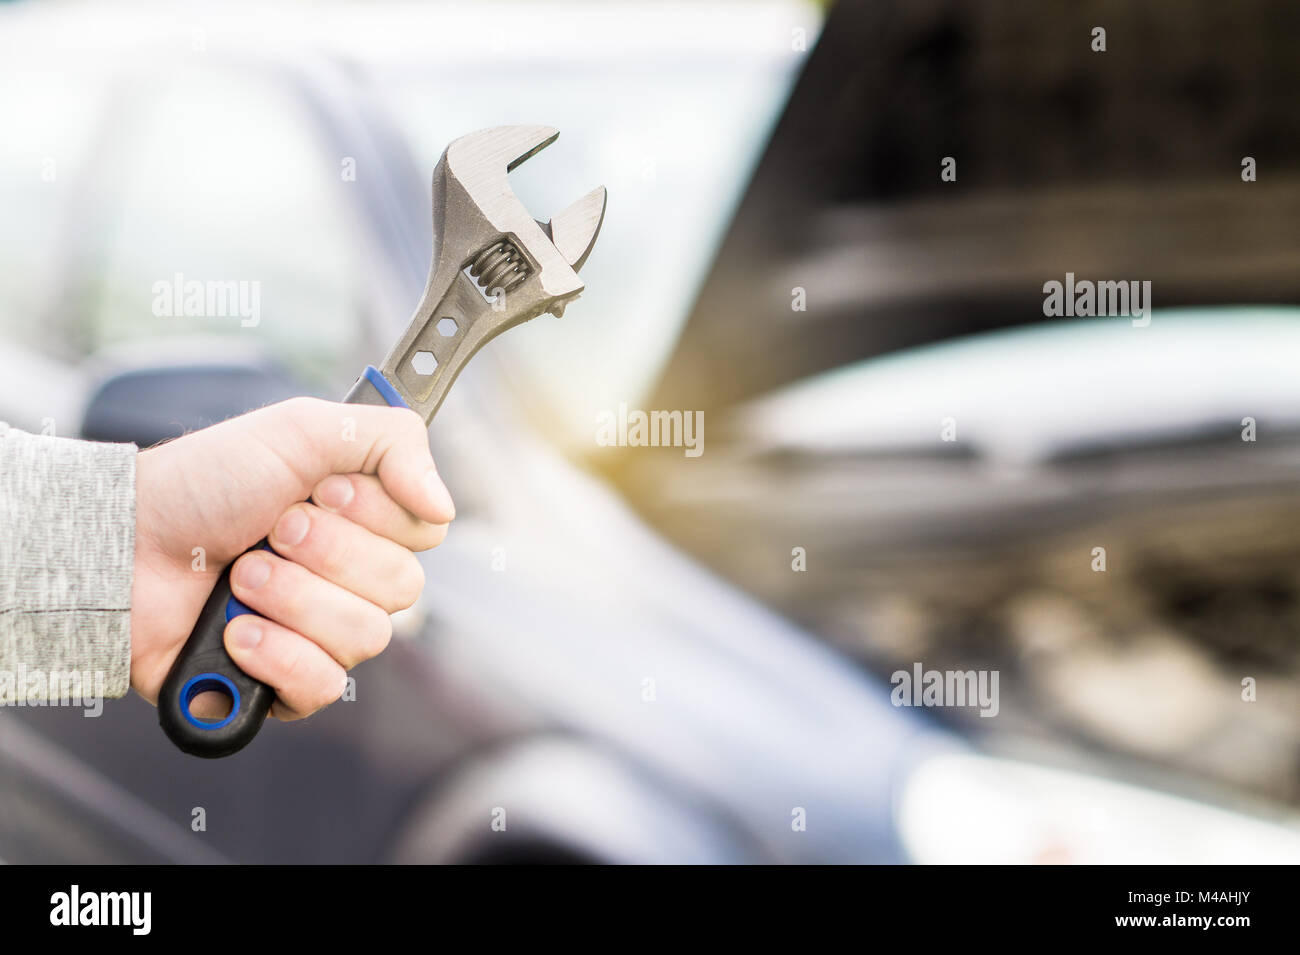 Car repair, maintenance and vehicle inspection concept. Man holding wrench in front of a car with under the hood and engine view. Stock Photo